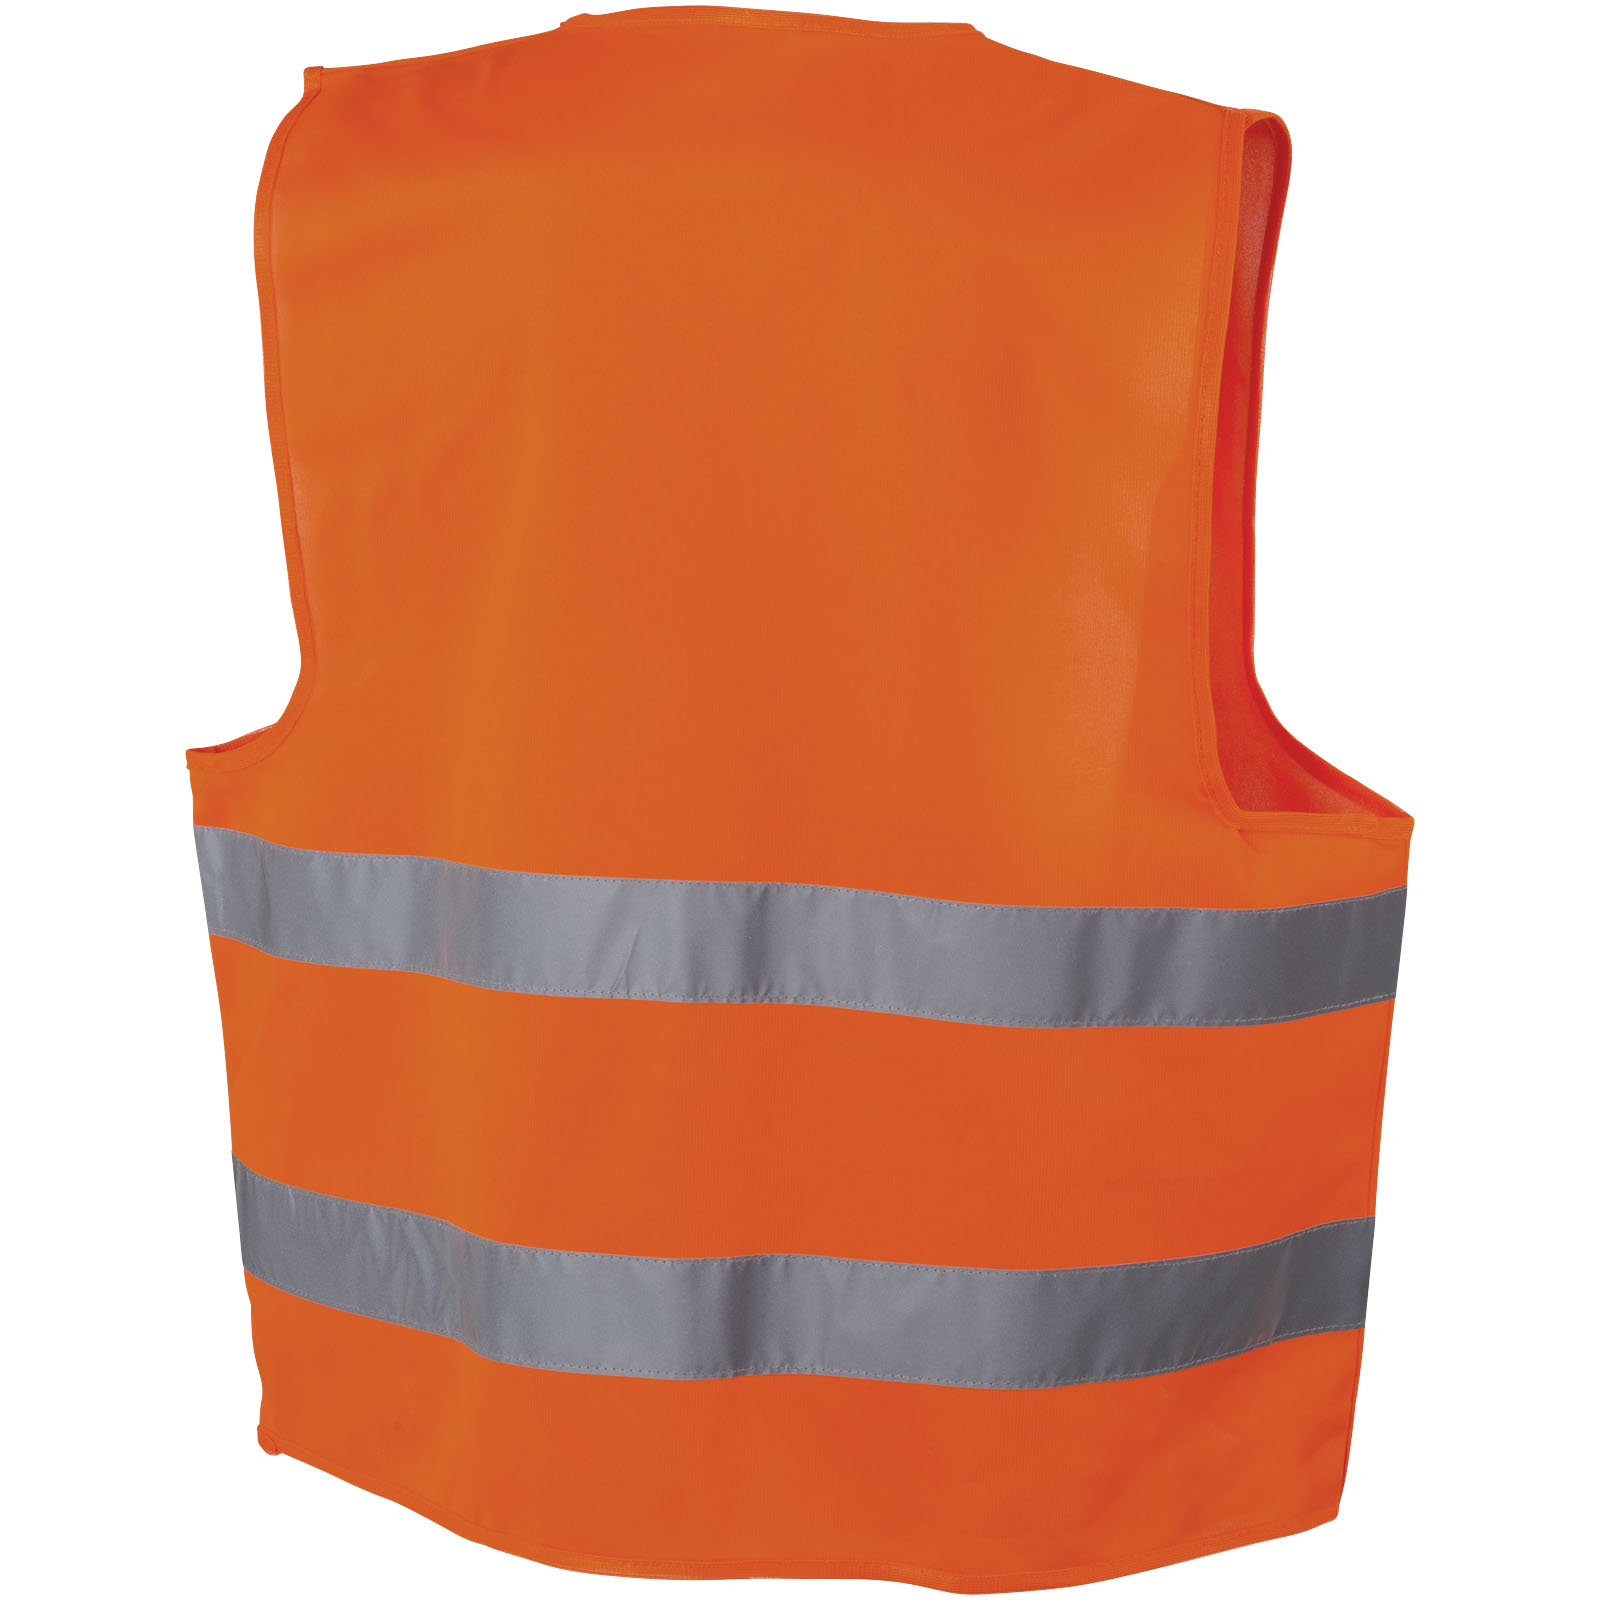 Advertising Safety Vests - RFX™ See-me XL safety vest for professional use - 1